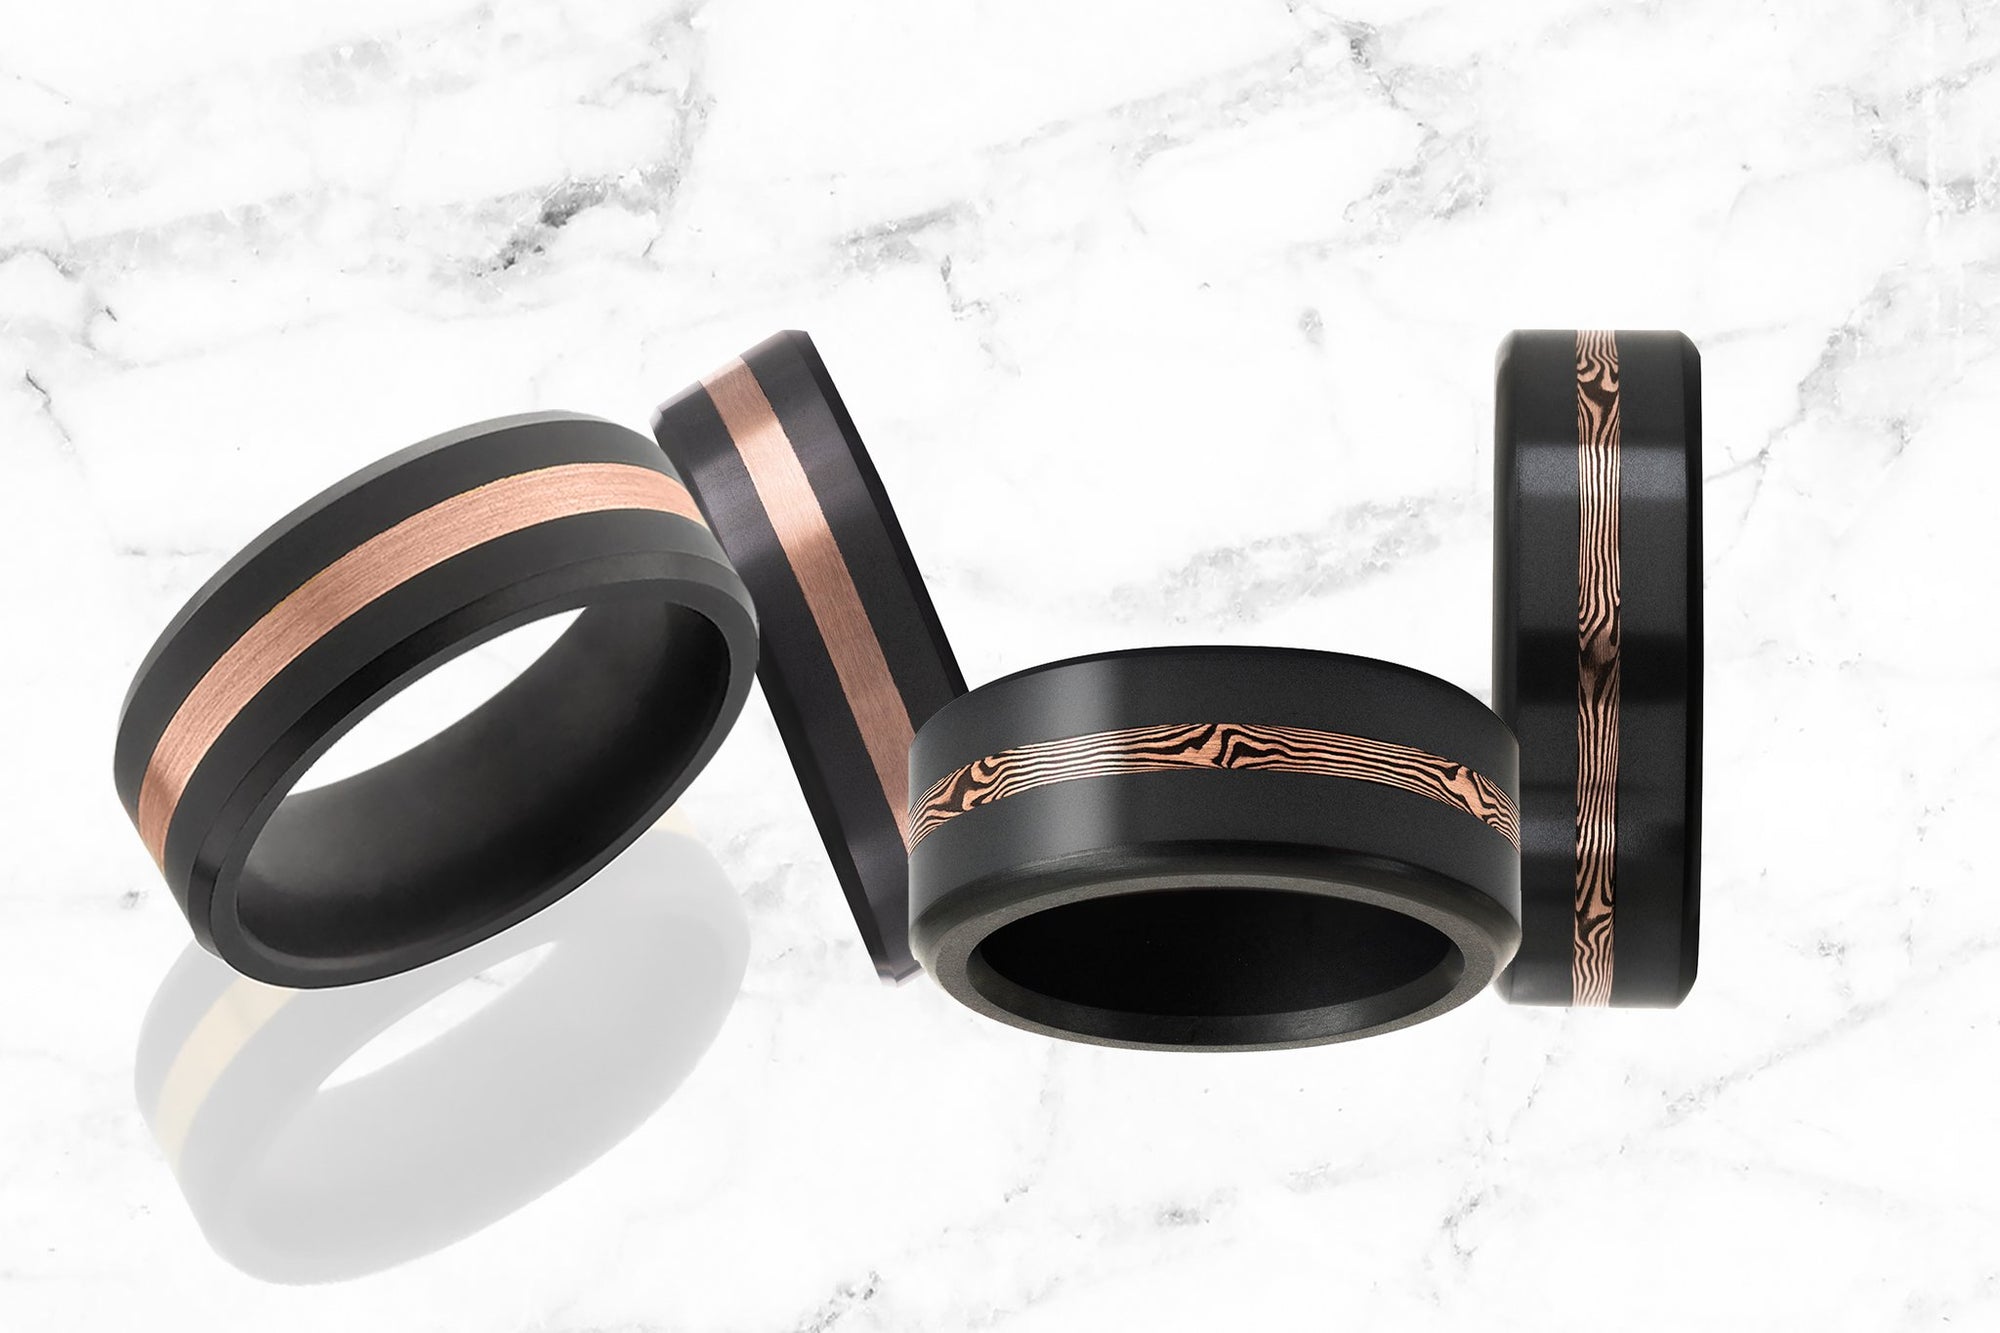 Elysium Black Diamond Wedding Bands Now Available With Rose Gold